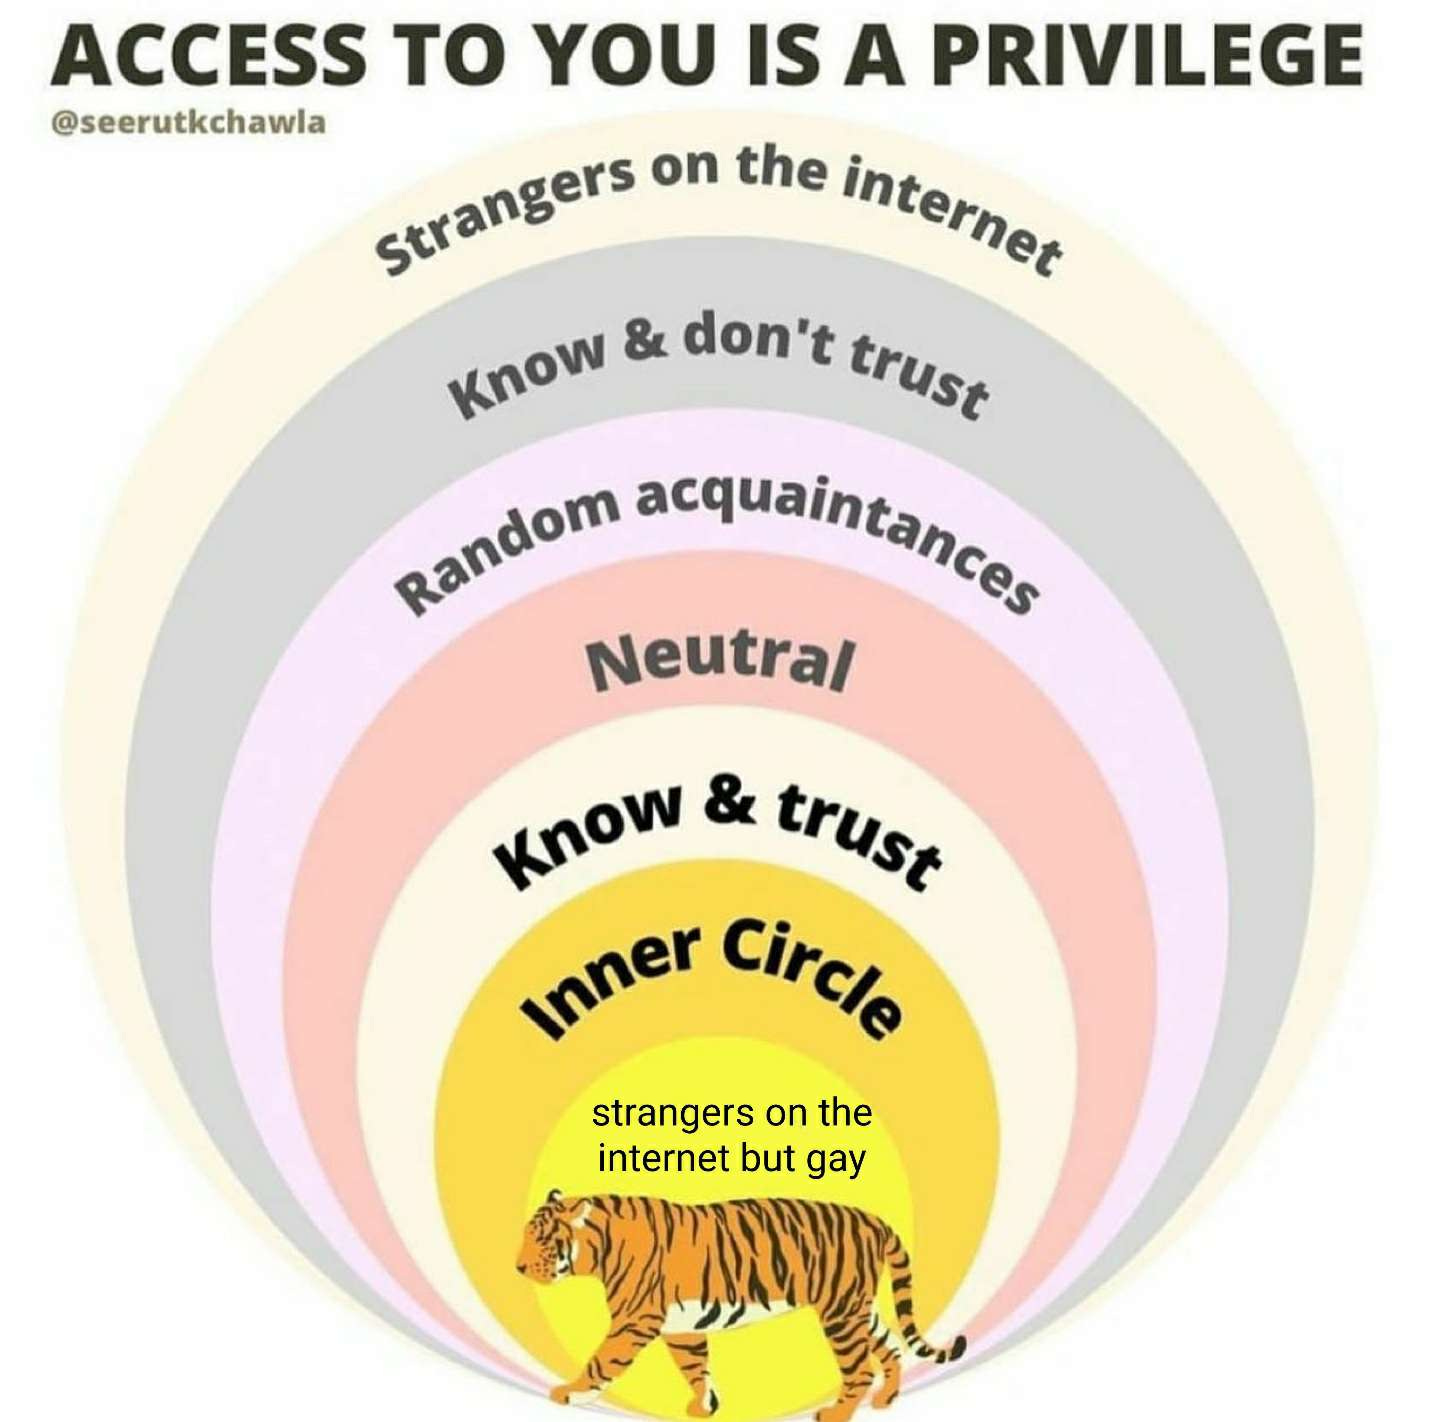 Meme that says "access to you is a privilege"; after a basically normal list, it concludes that the most intimacy is for "strangers on the internet but gay."